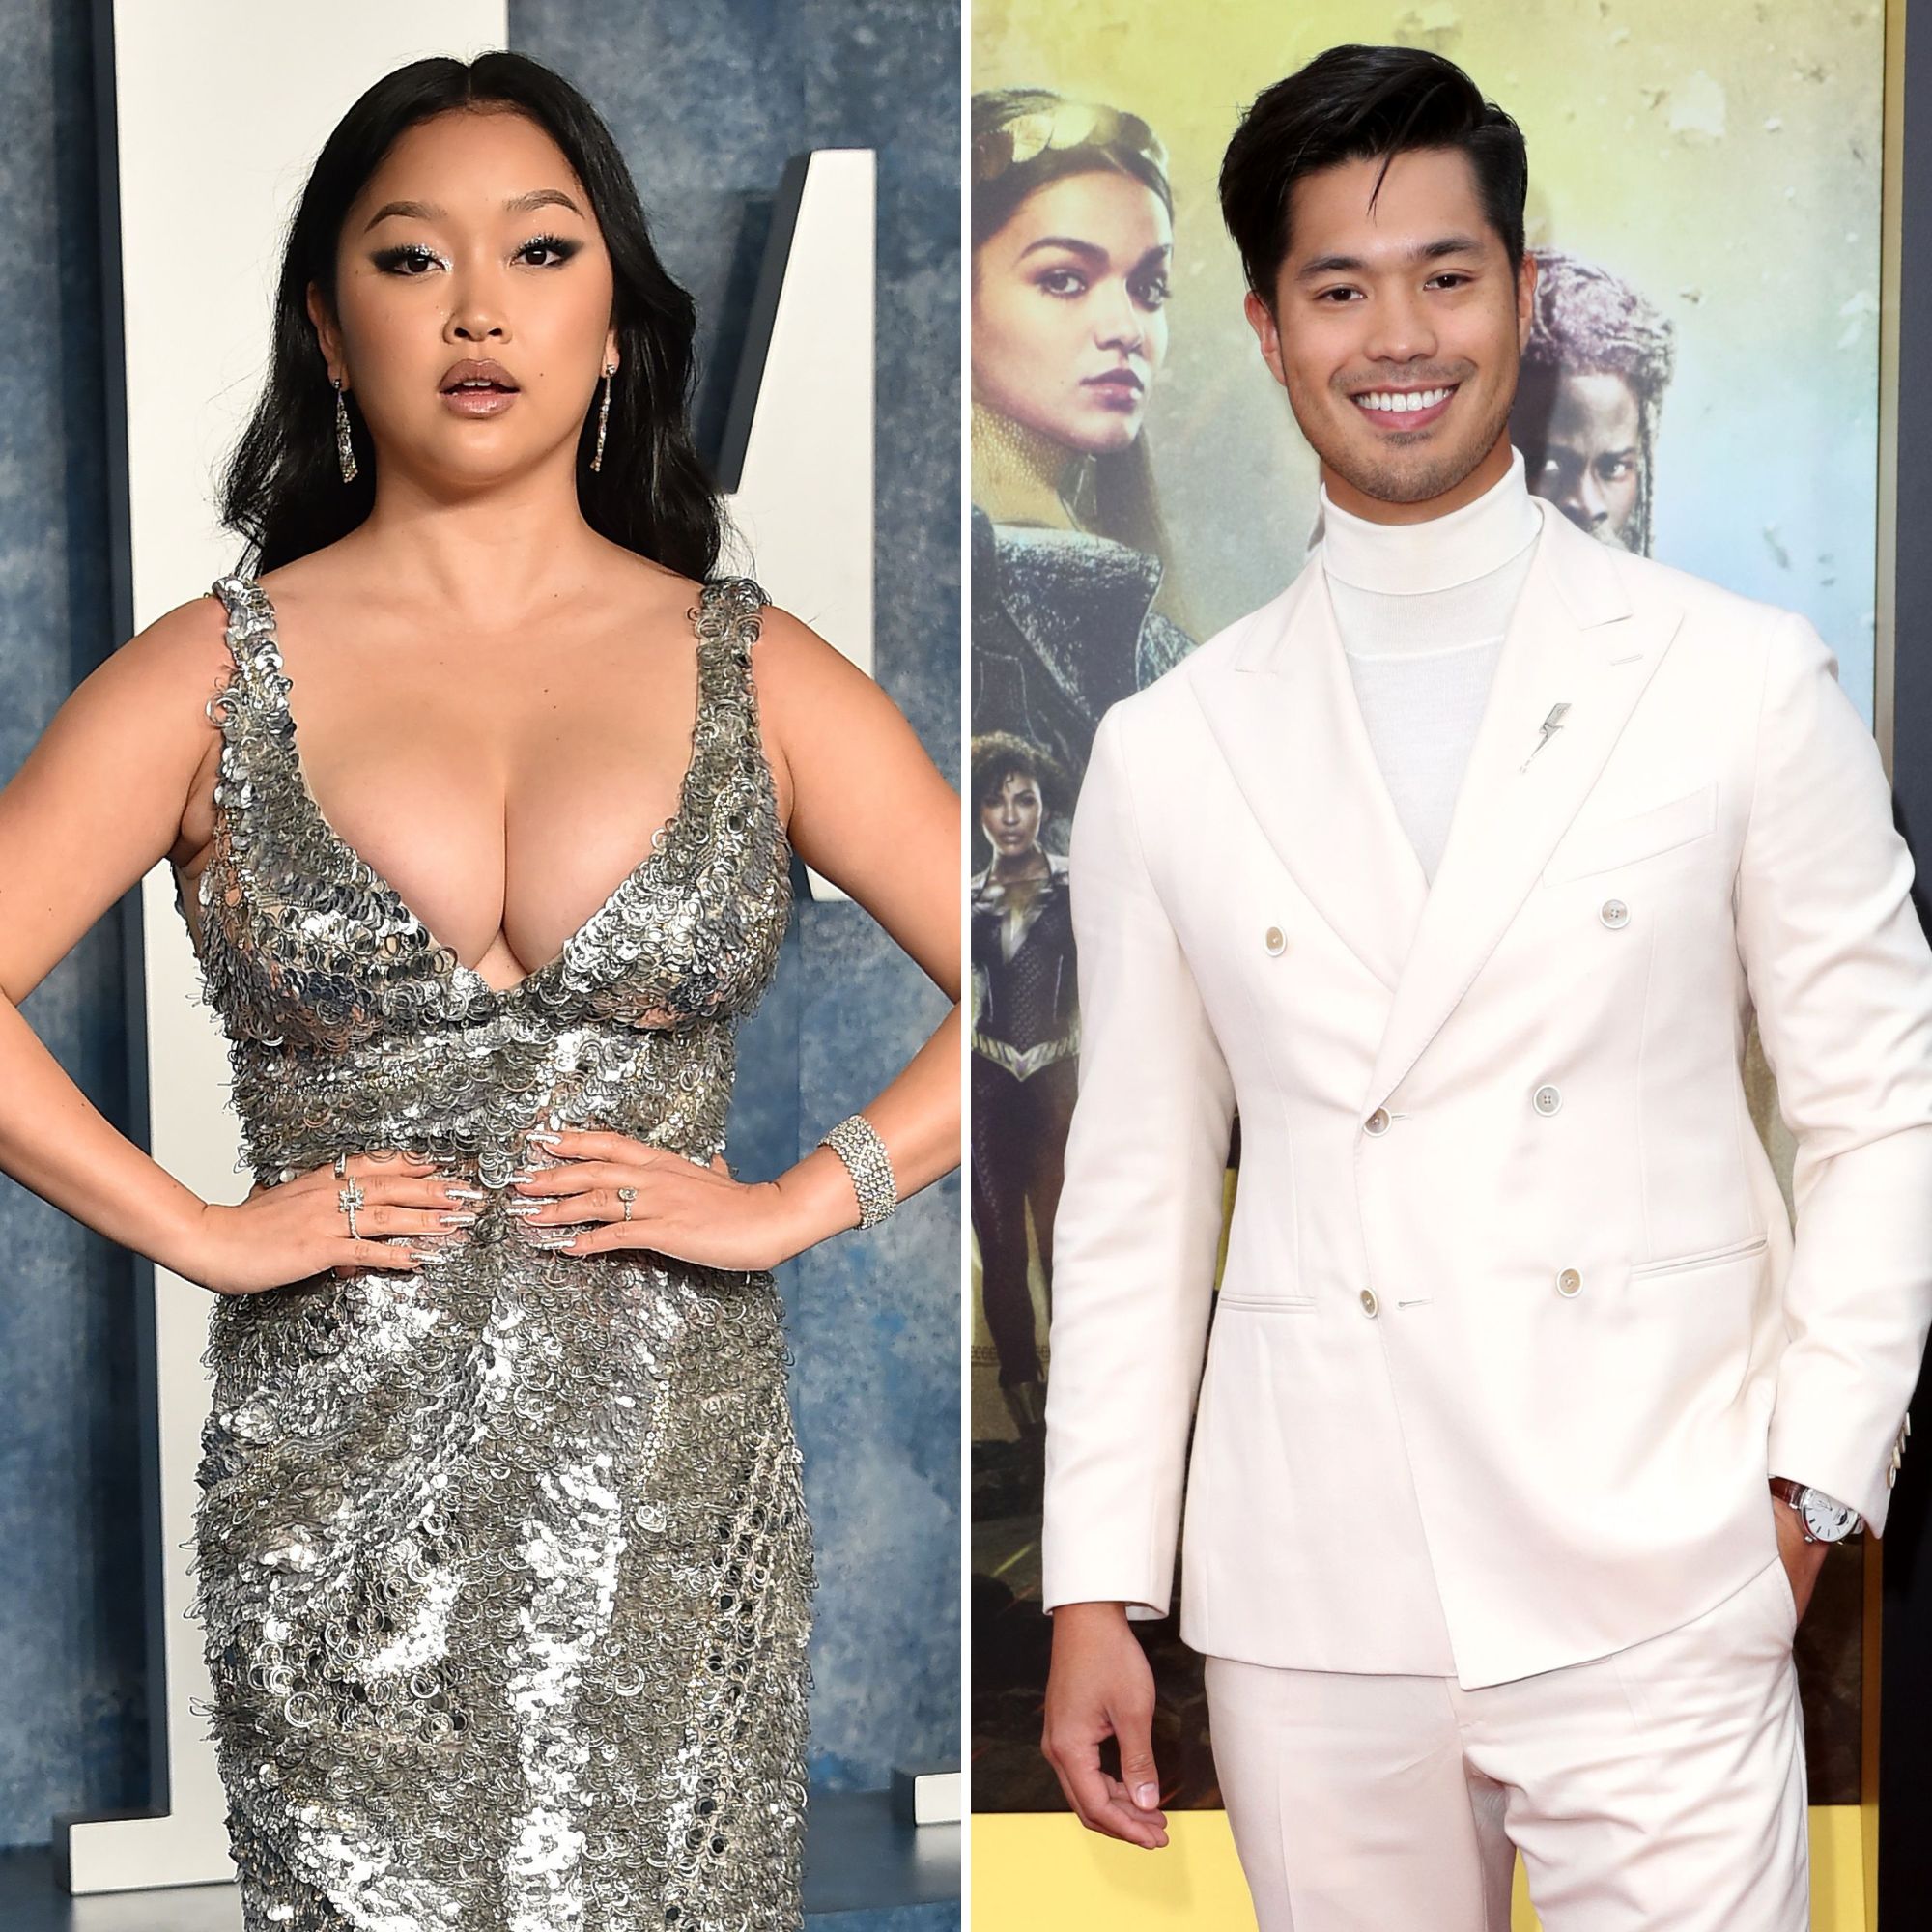 Lana Condor, Ross Butler Reunite for ‘Worth the Wait’ Movie: Cast, Release